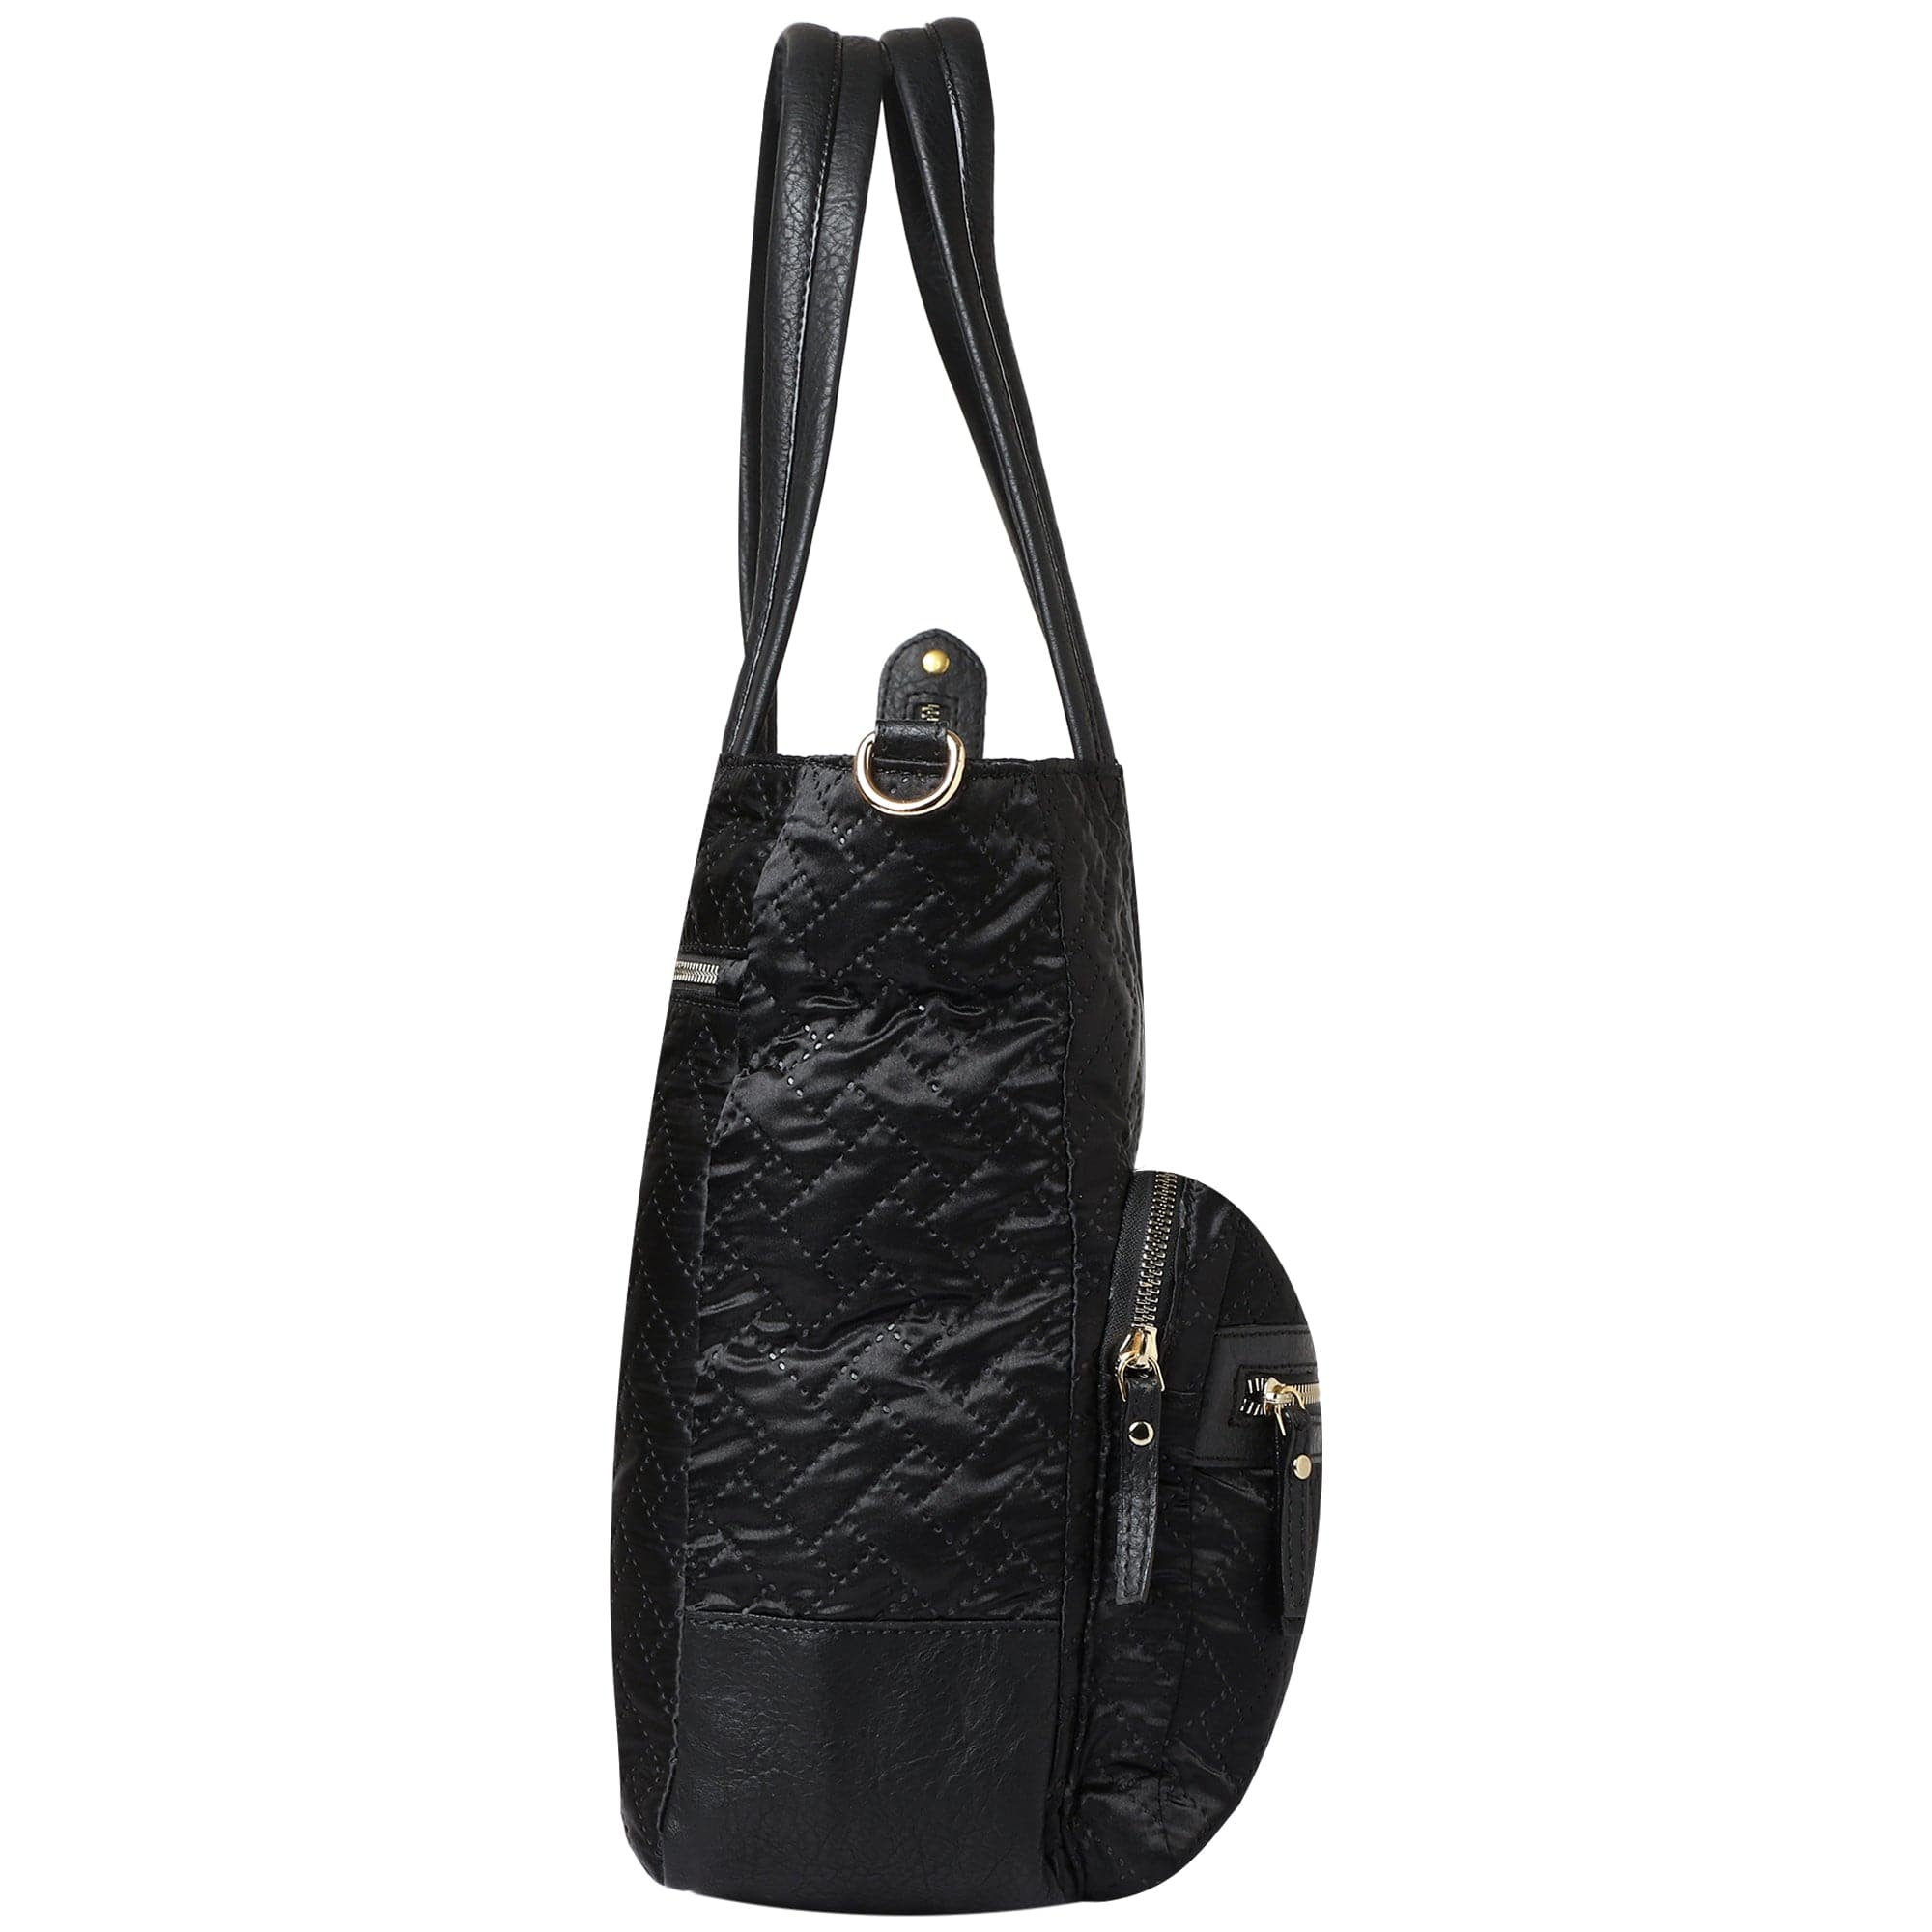 New Mona B Large Recycled Quilted Polyester Handbag for Women | Tote Bag for Grocery, Shopping, Travel | Stylish Vintage Shoulder Bags for Women: Black - Handbag by Mona-B - Backpack, New Arrivals, Sale, Shop2999, Shop3999